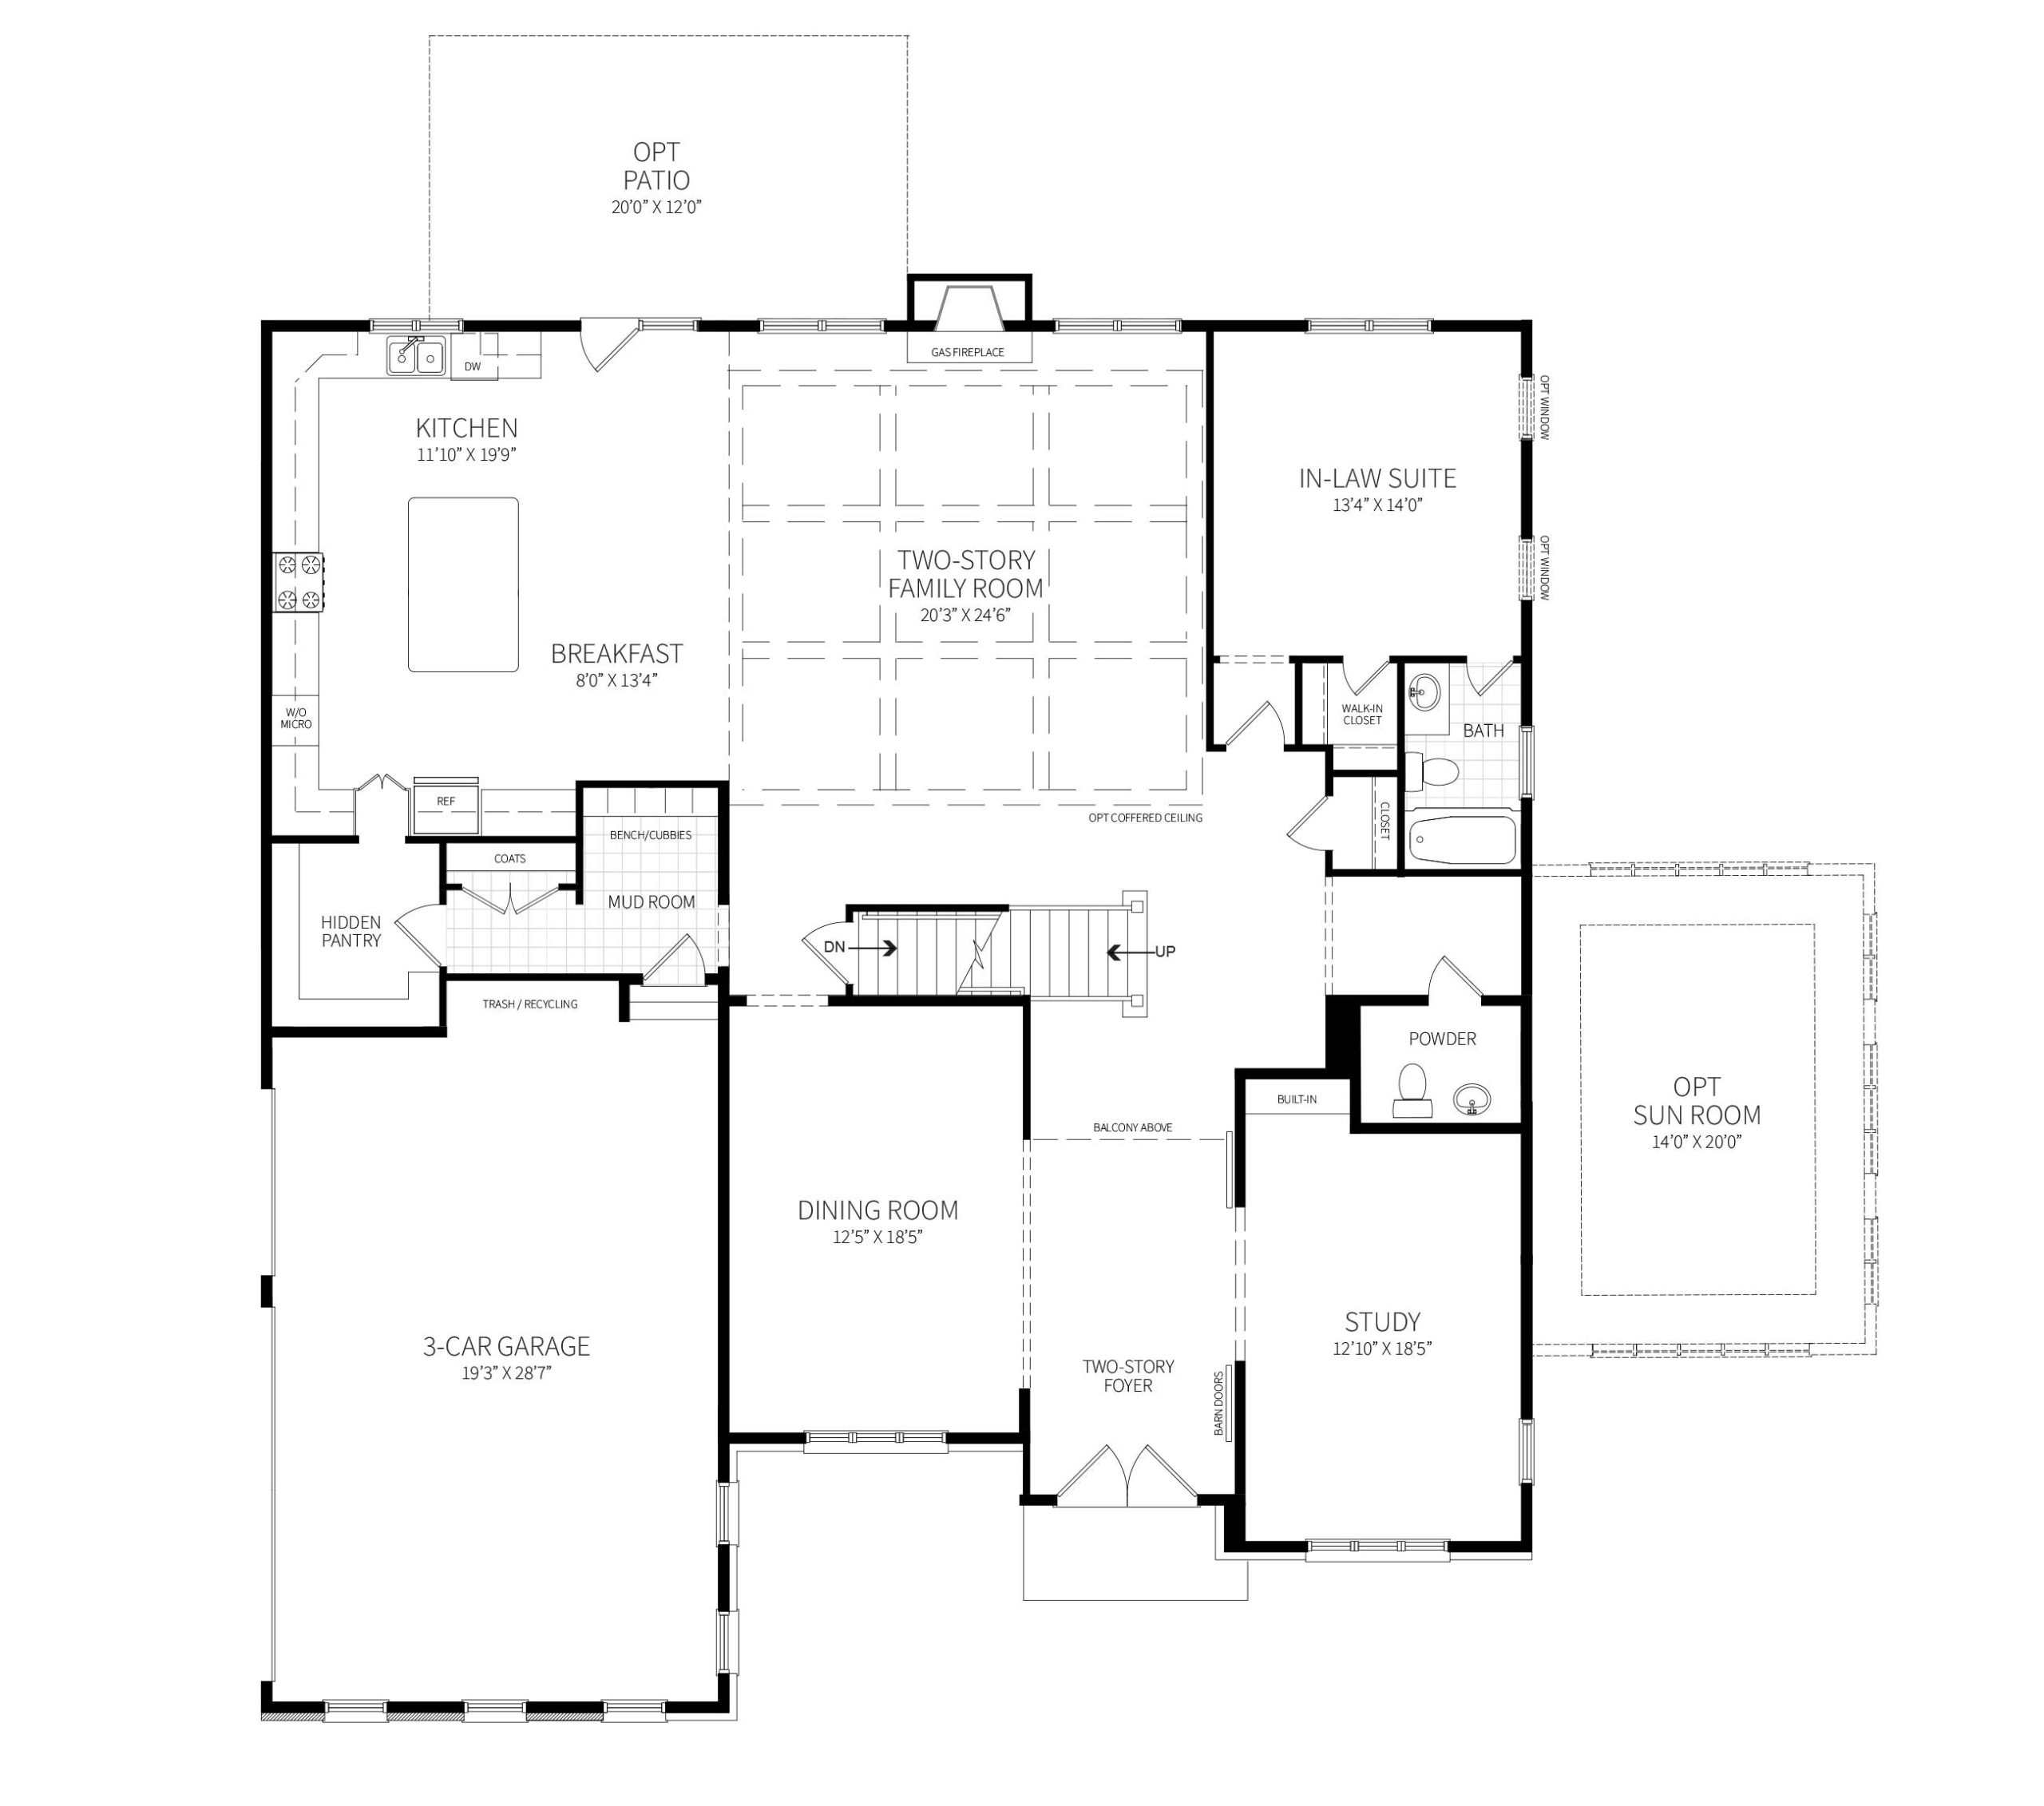 the first floor plan of the home proposed for 10301 South Glen Rd, featuring an in-law suite with bath.